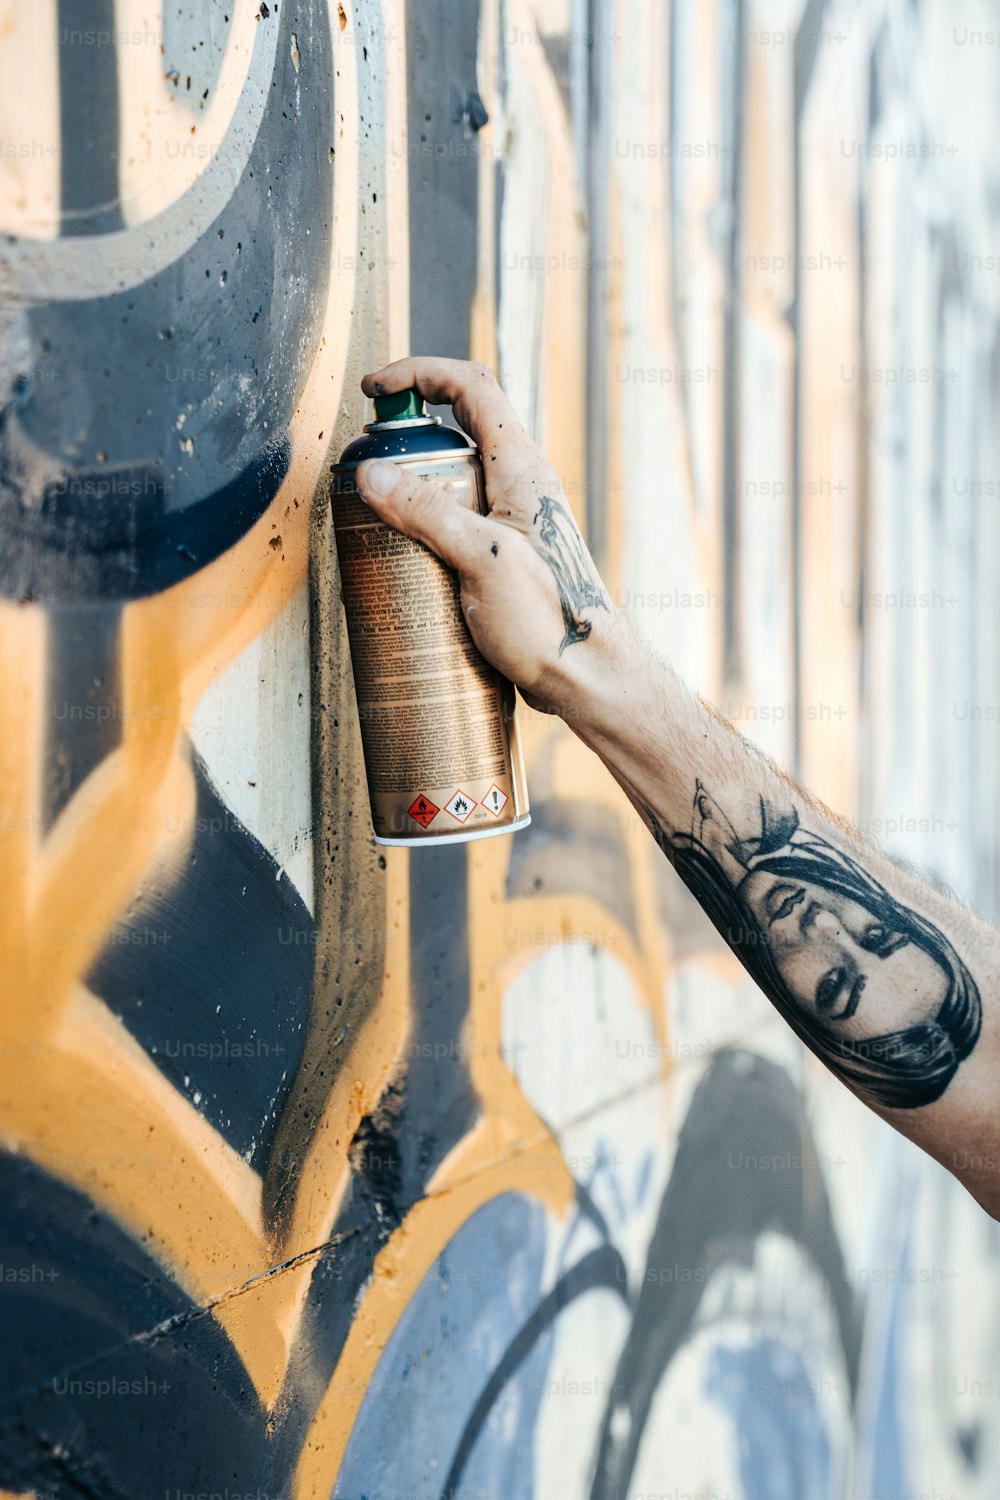 a man is spray painting a wall with graffiti